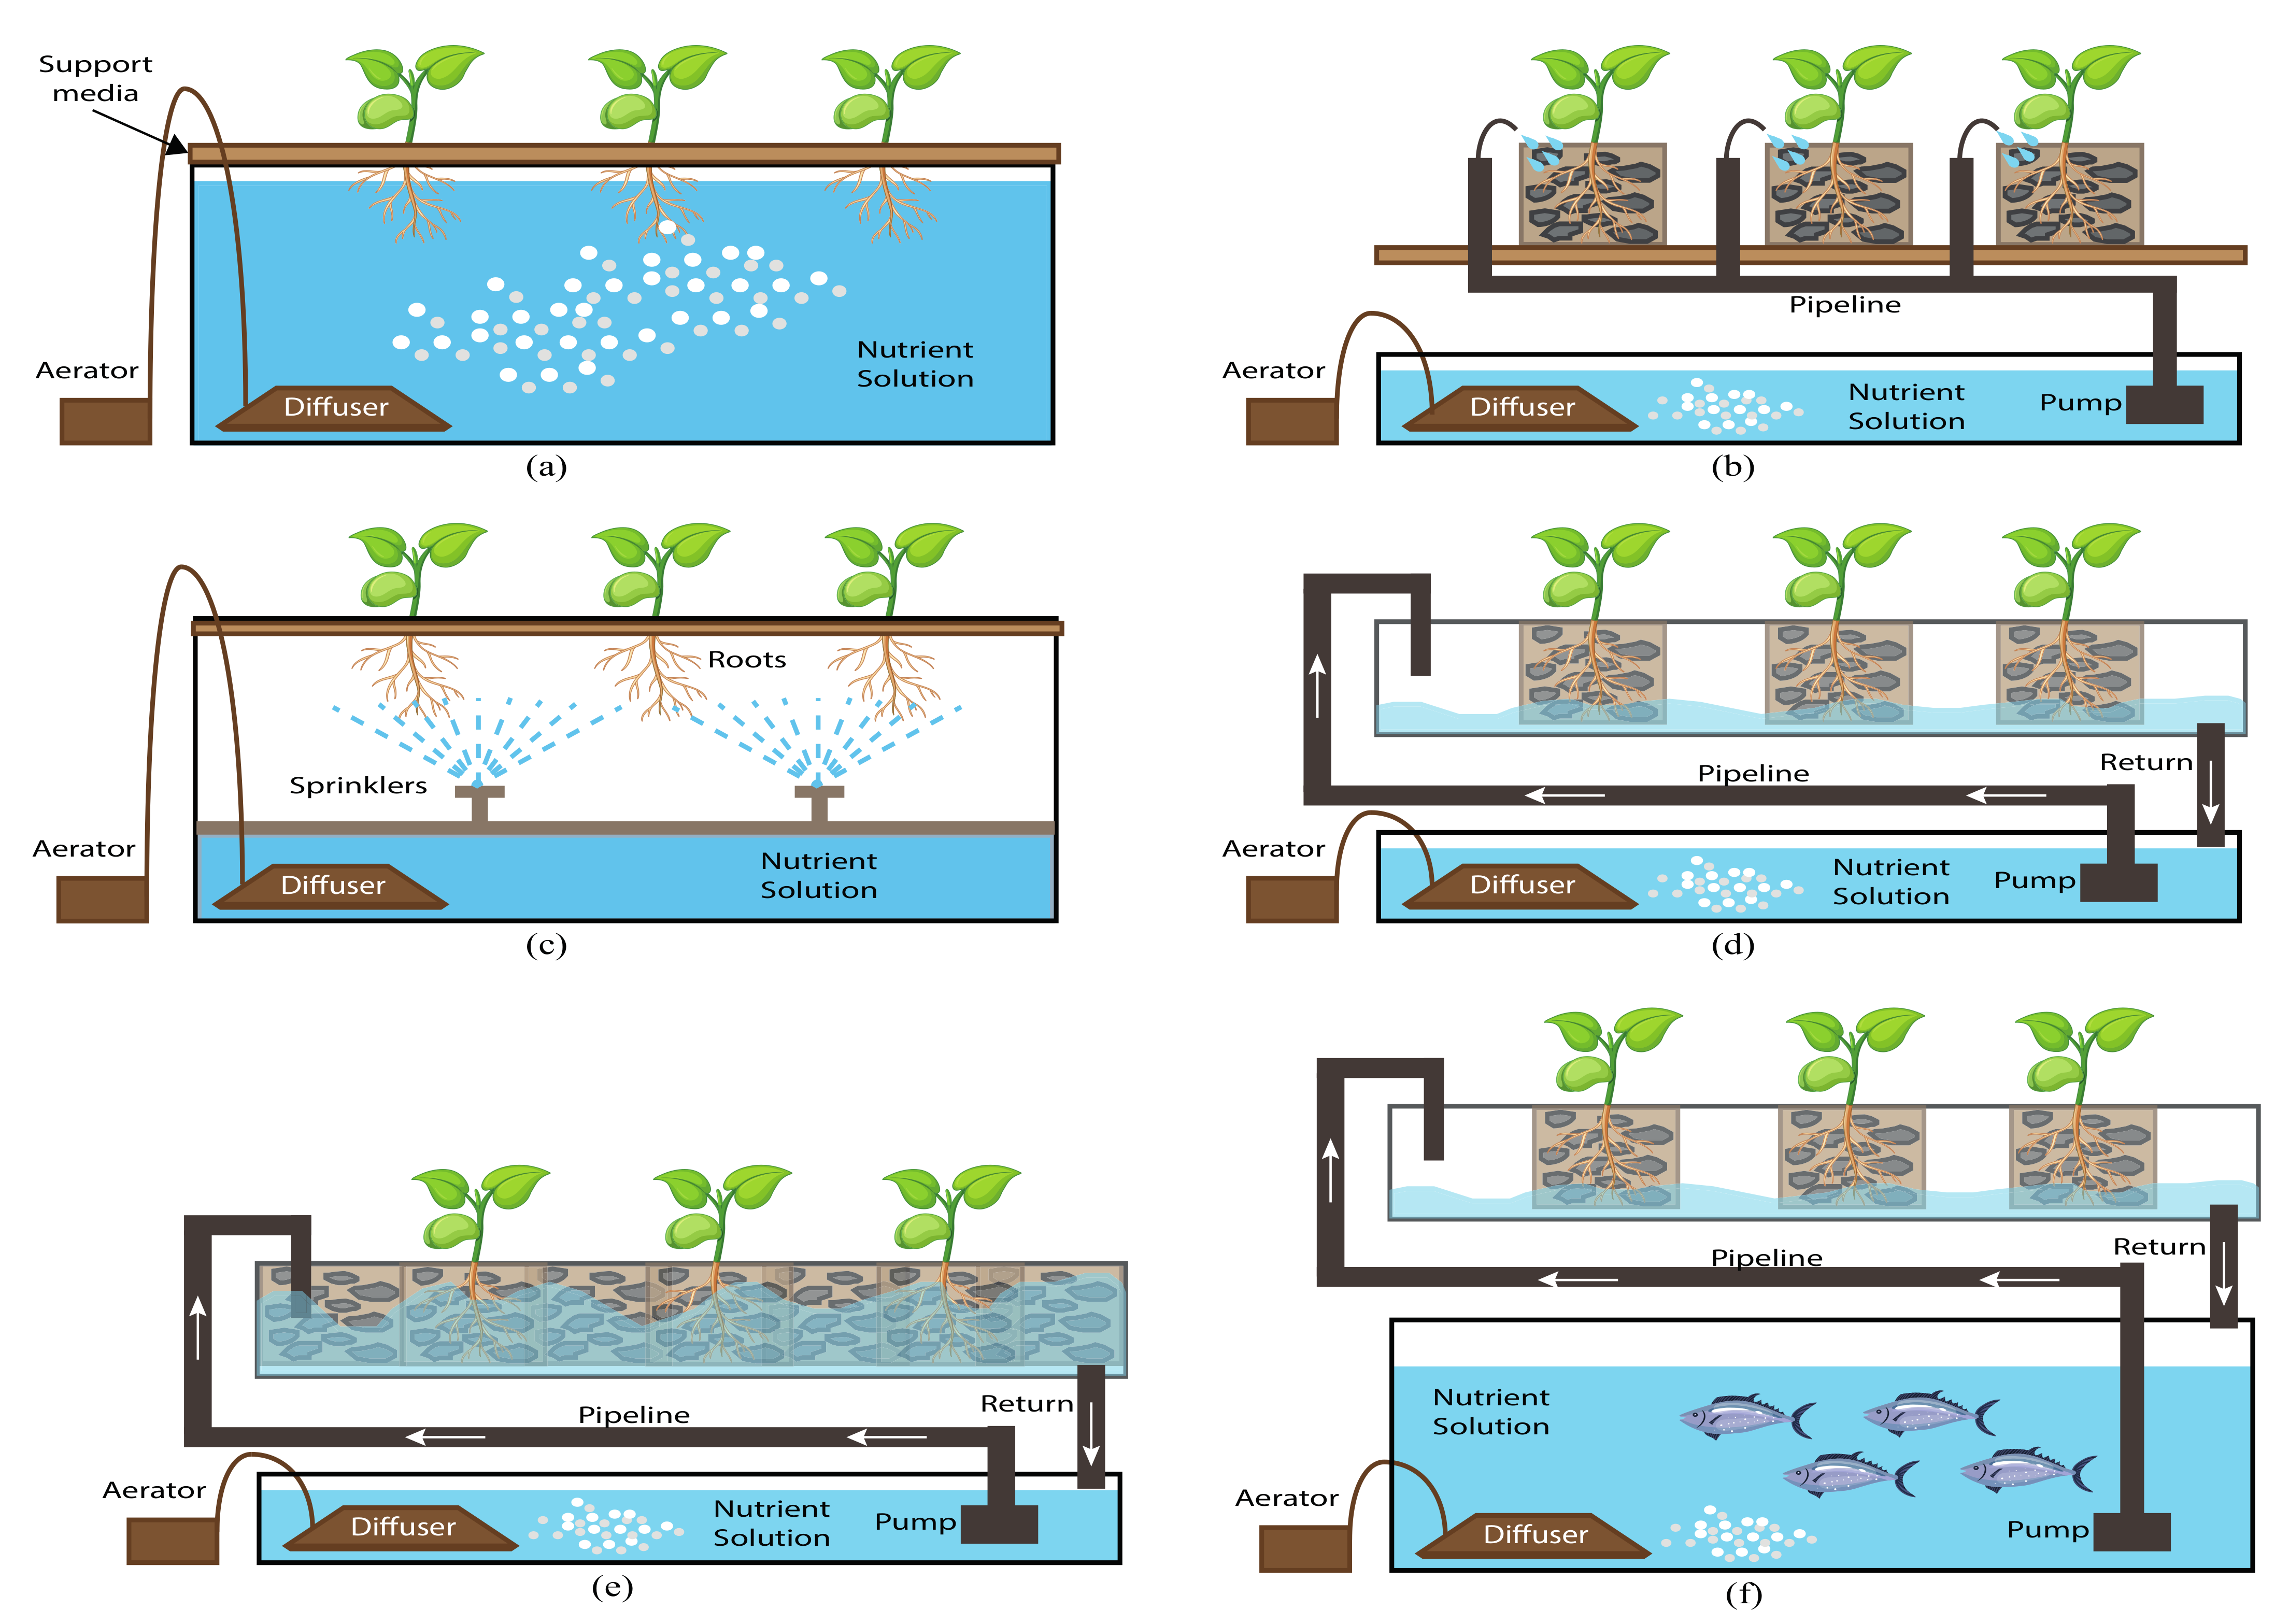 III. Factors Affecting the Efficiency of Closed-Loop Hydroponics Systems